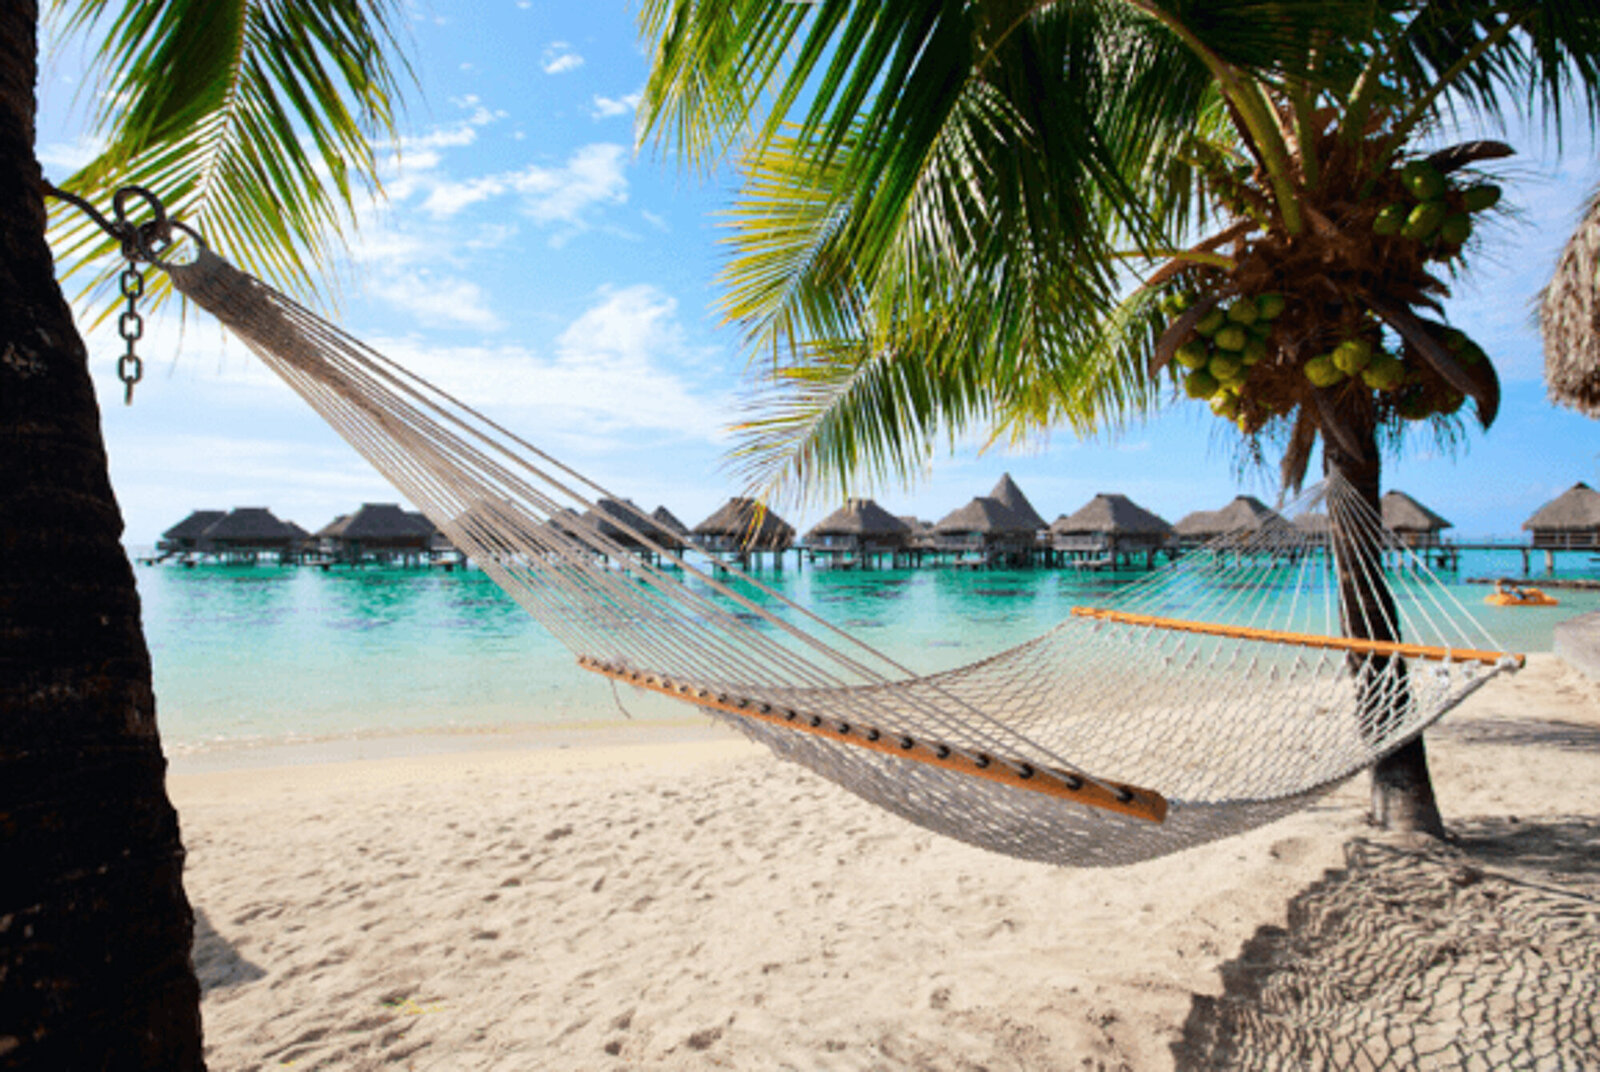 A hammock in front of the beach